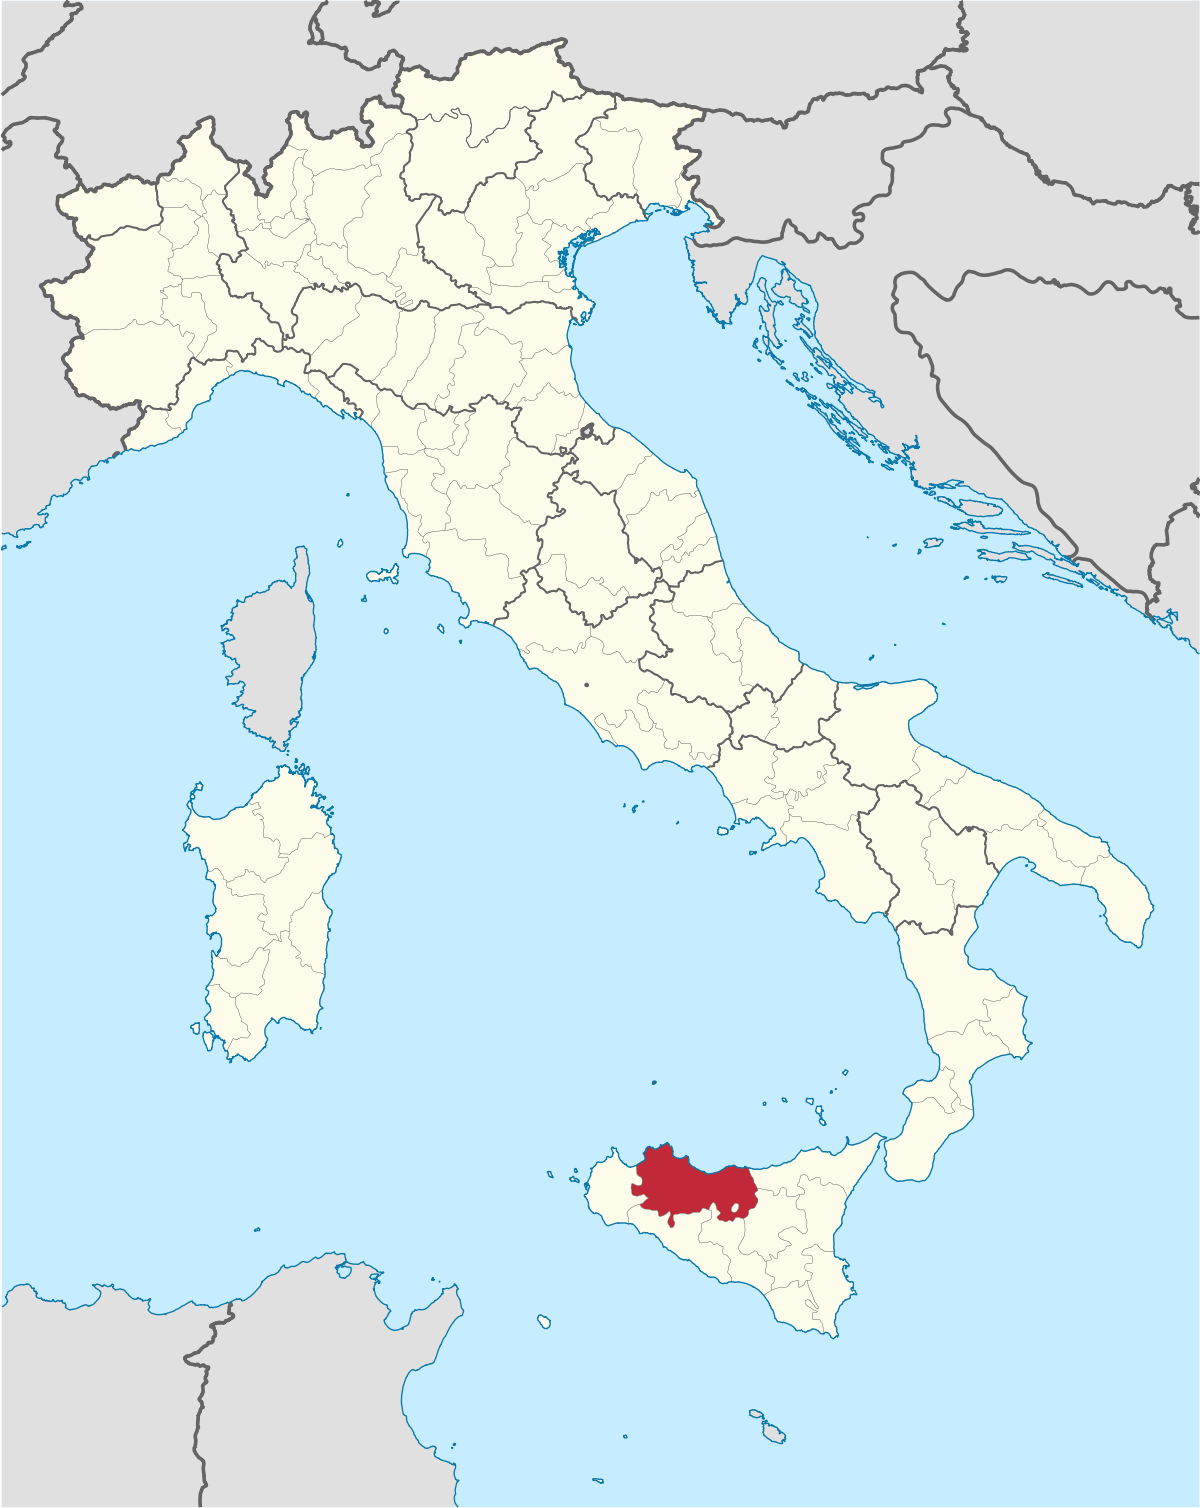 The map of Palermo